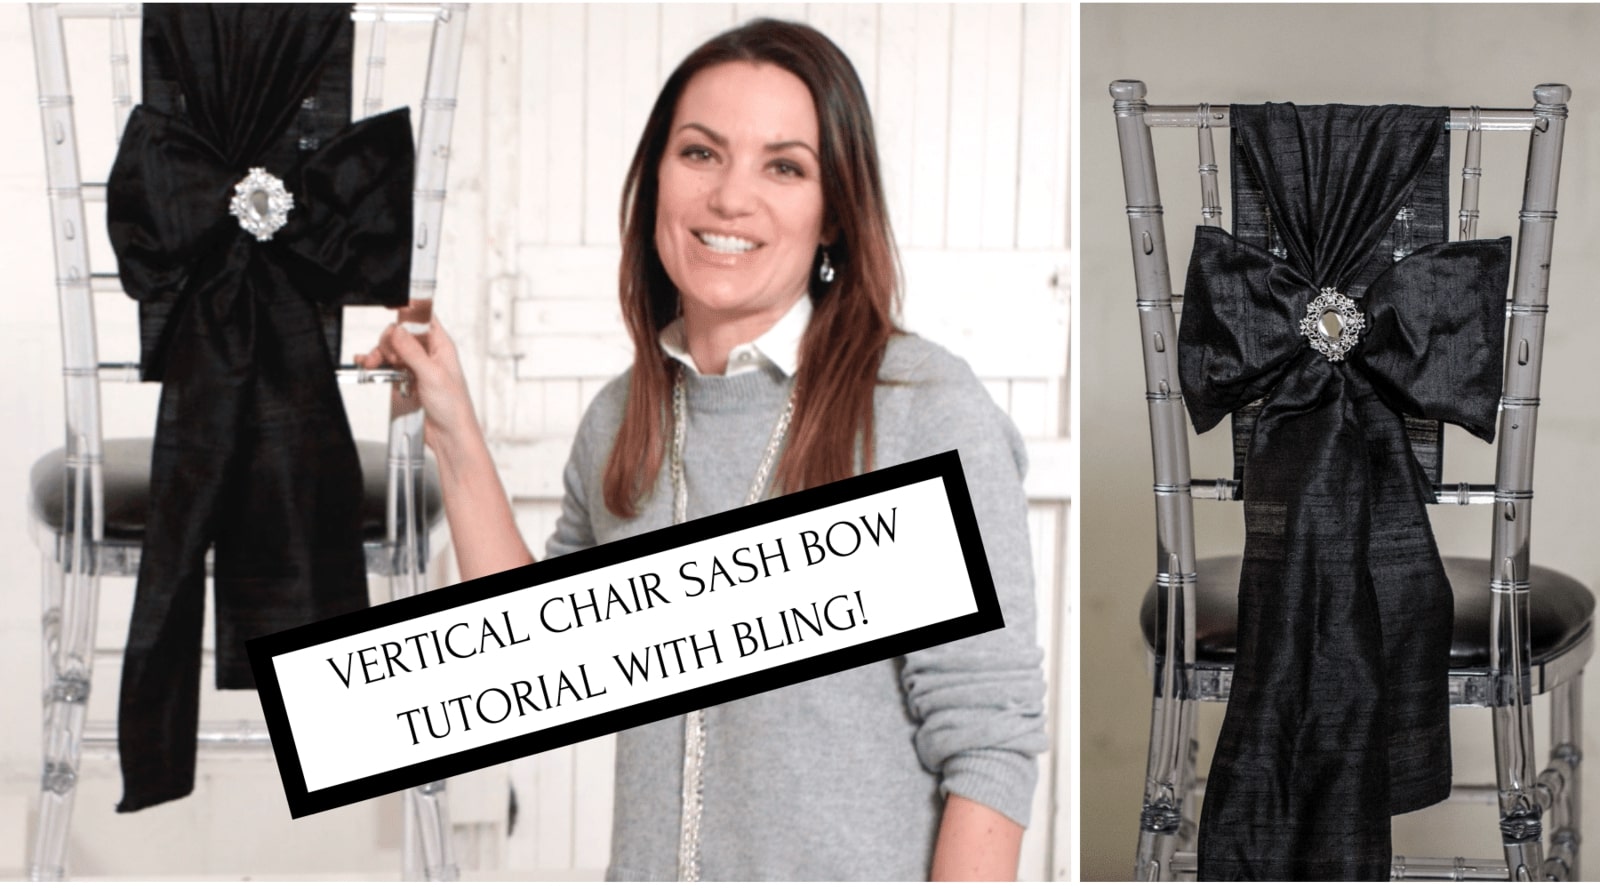 How to Tie a Vertical Chair Sash